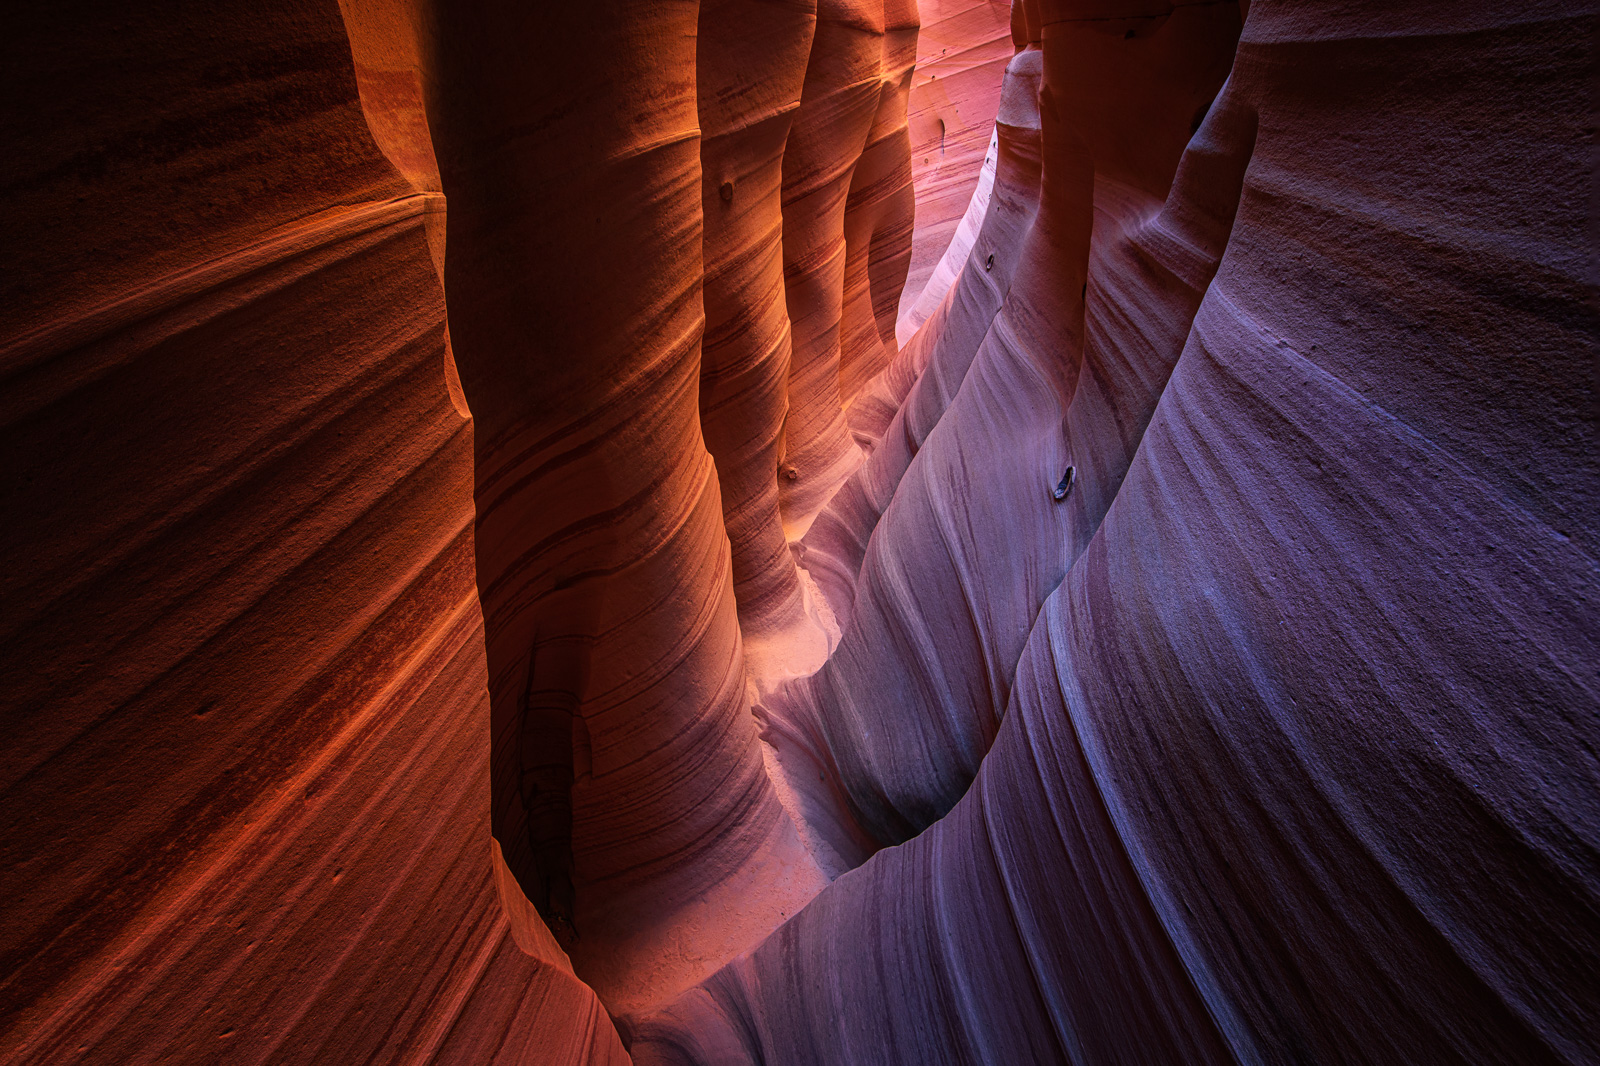 Zebra Slot canyon sits in a remote canyon inside of the Grand Staircase of Southern Utah.